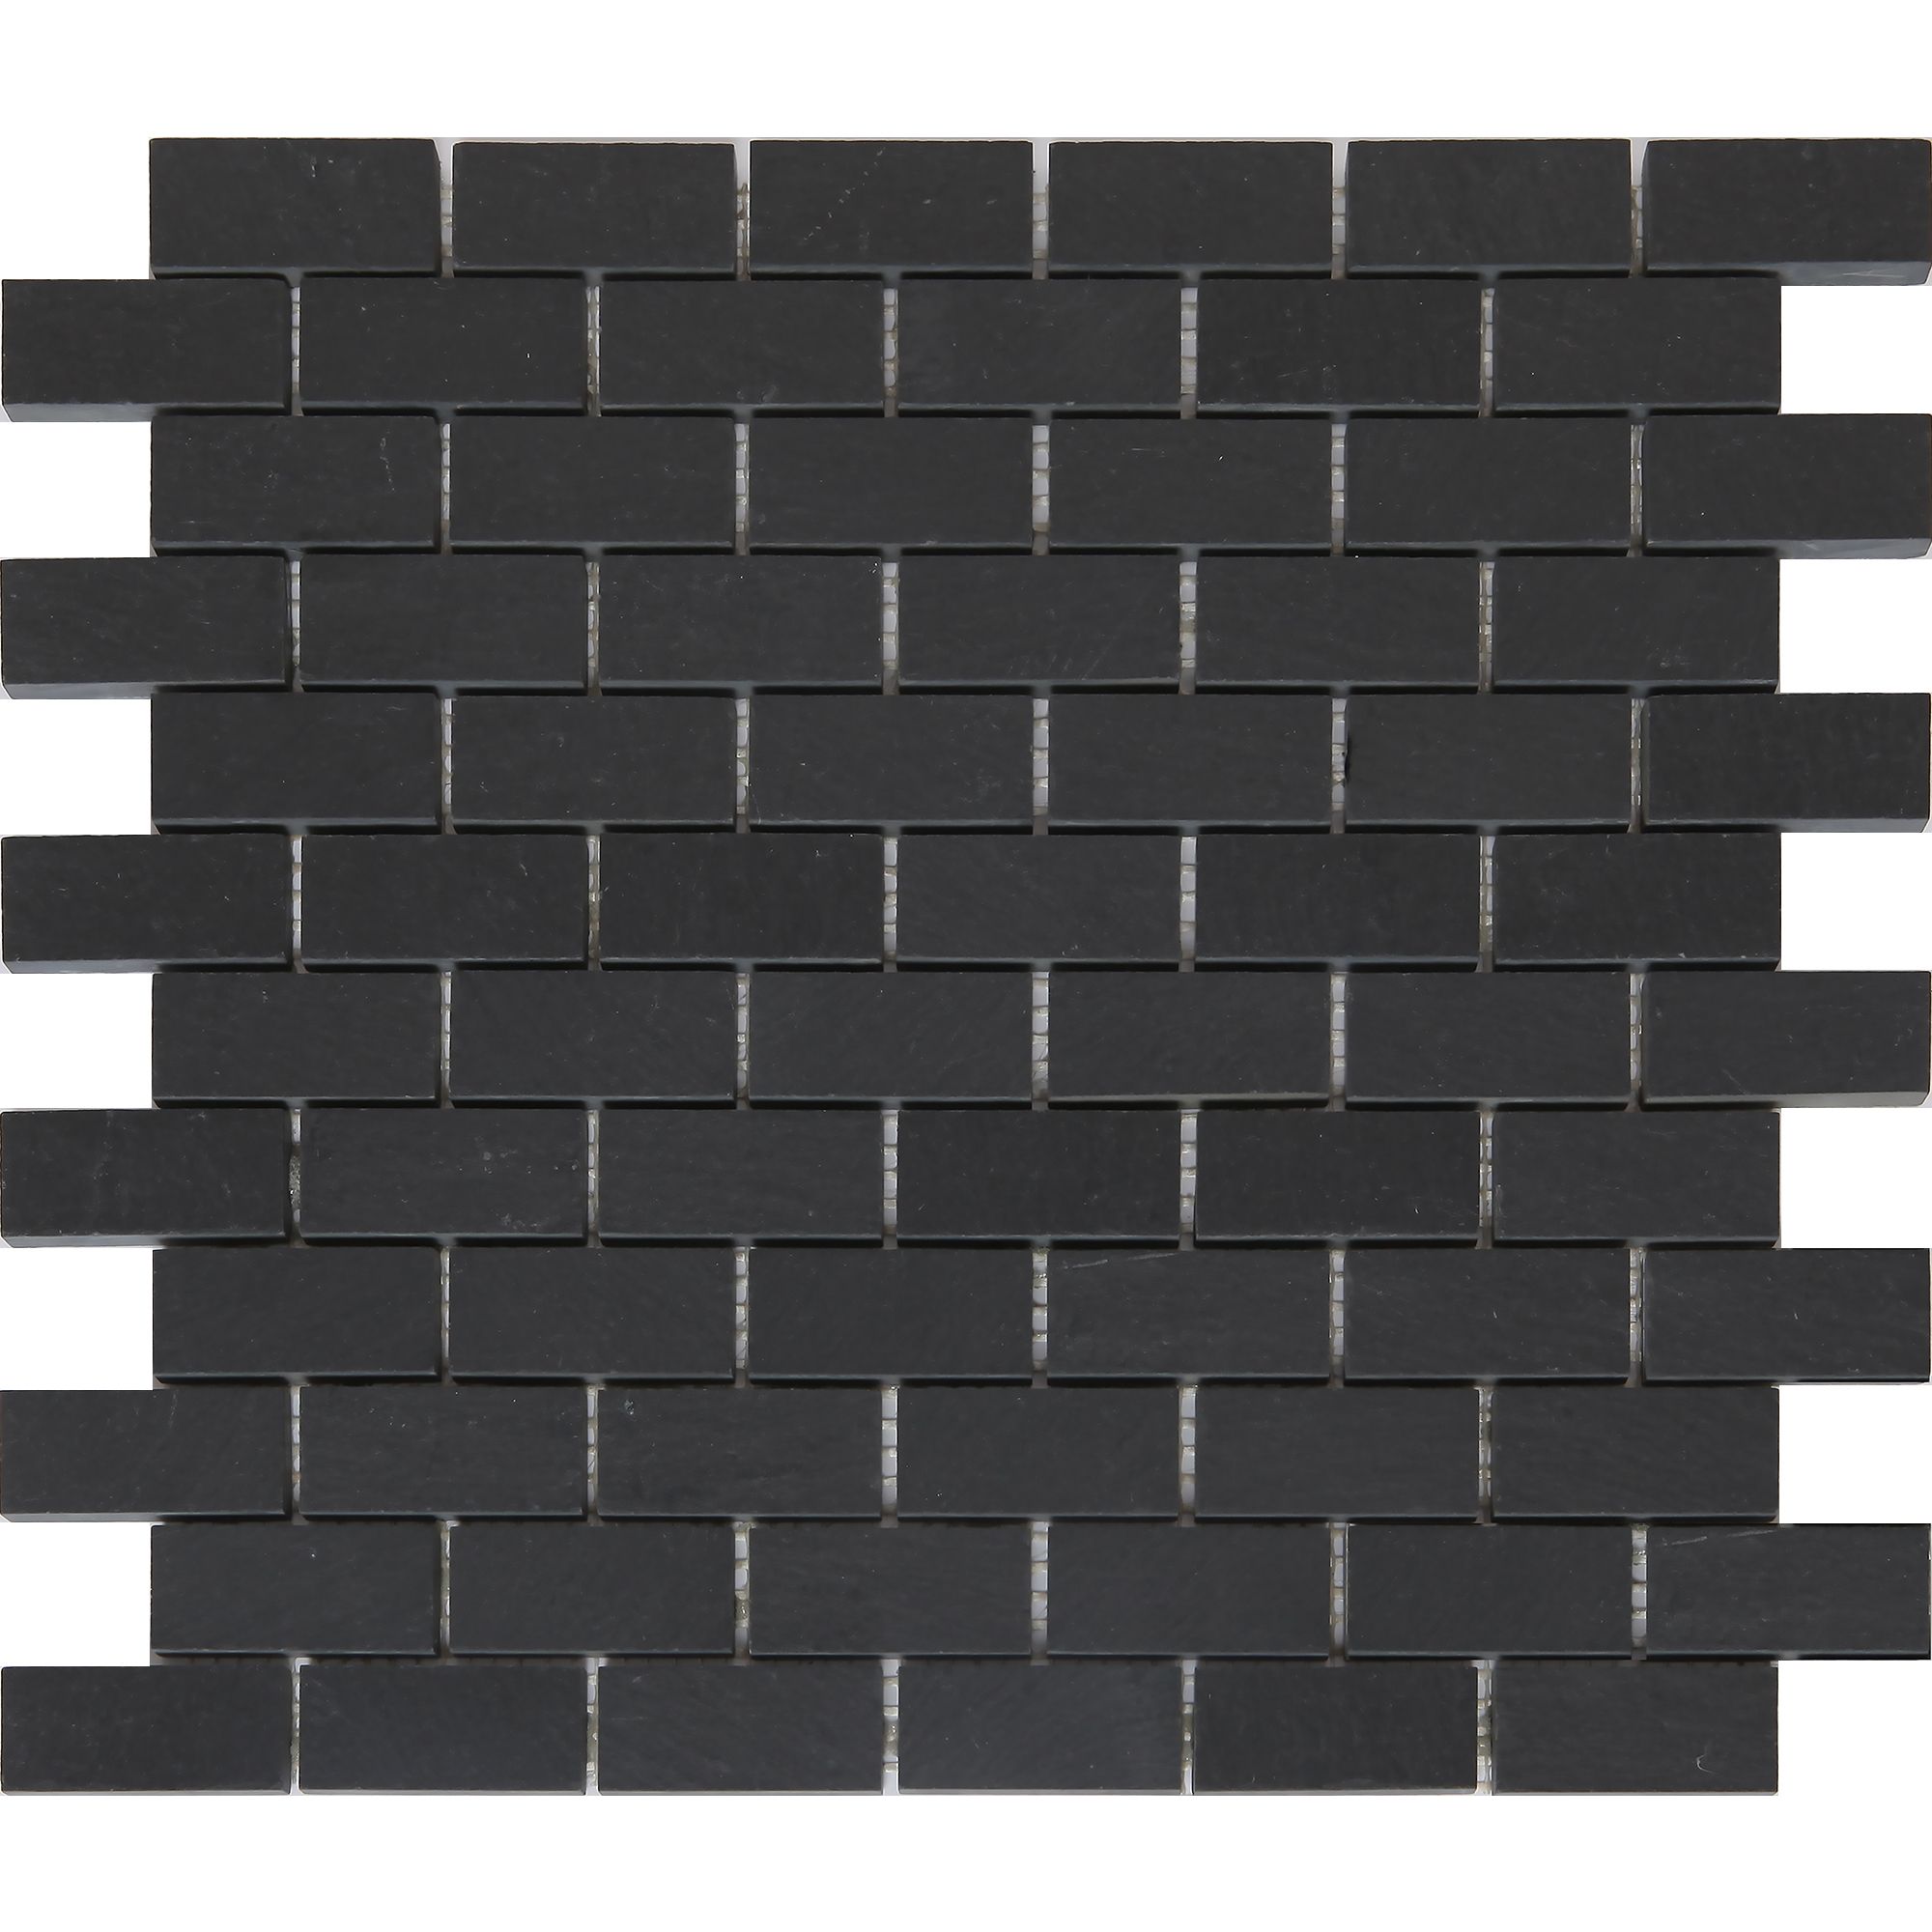 Slate Anthracite Polished Matt Stone effect Natural structure Natural stone Mosaic tile sheet, (L)300mm (W)300mm